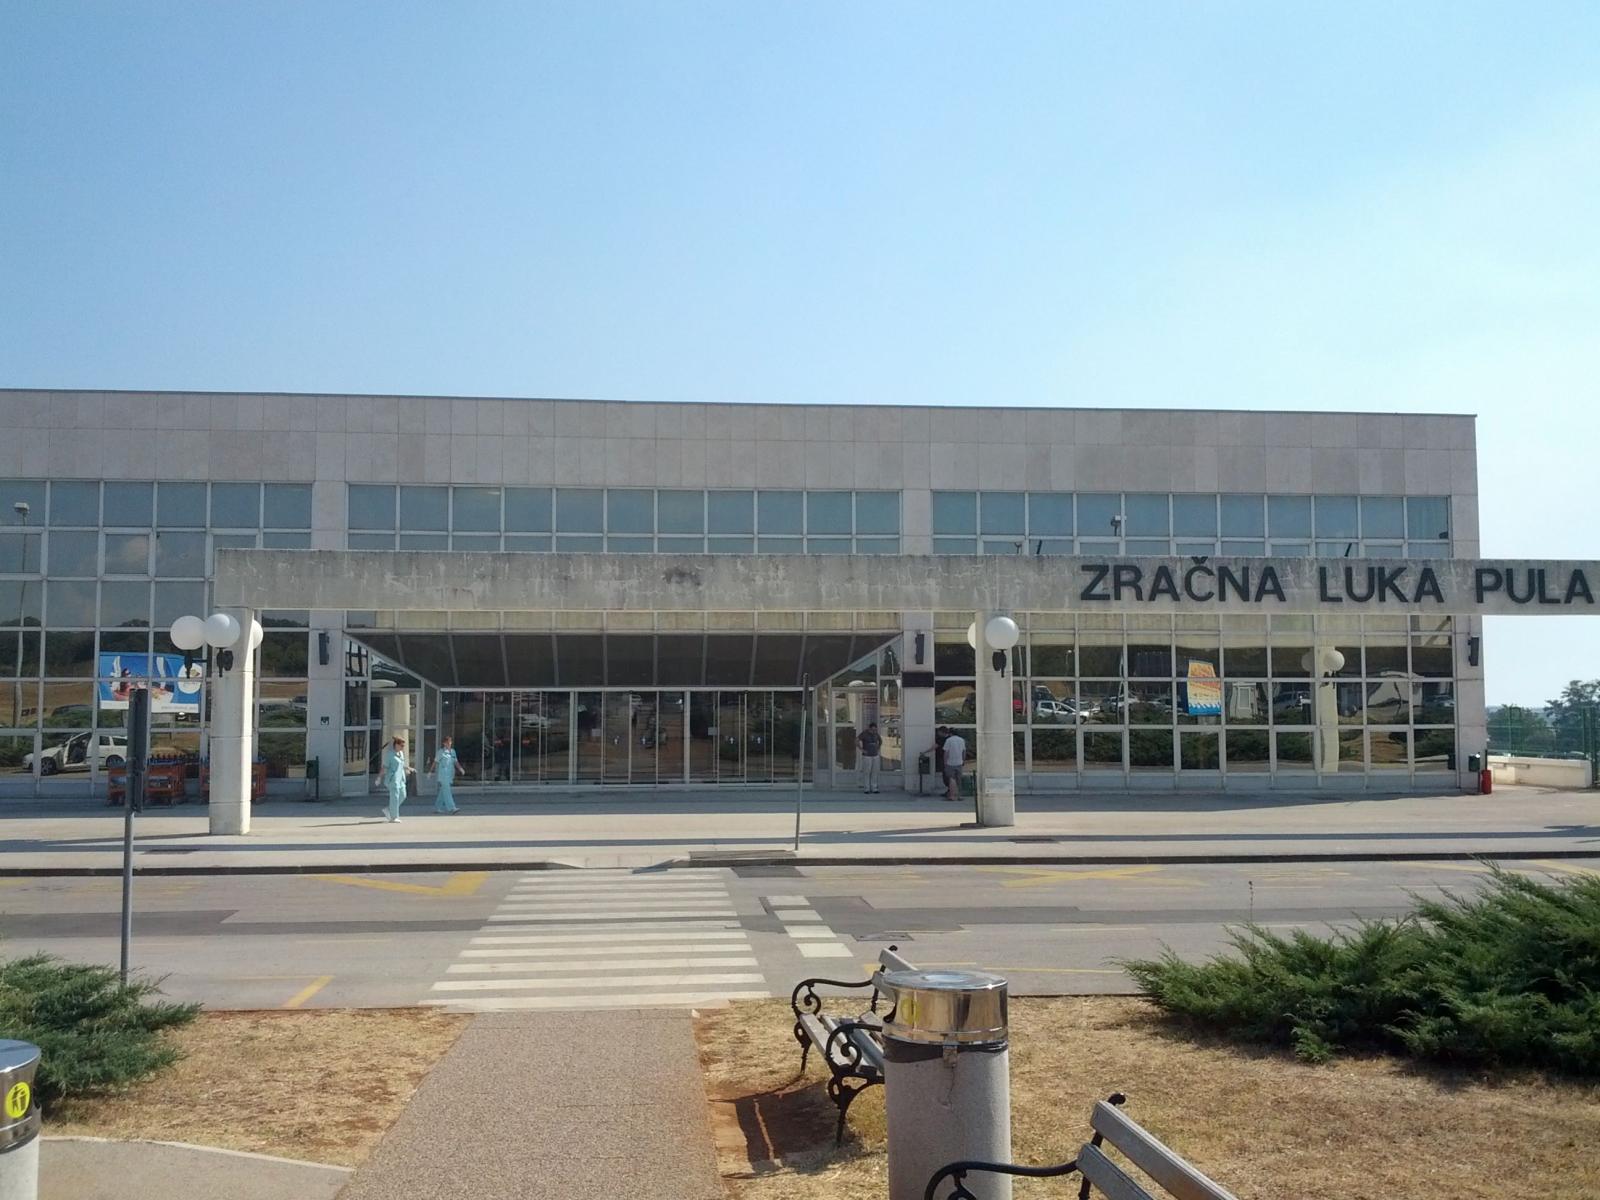 The Pula airport building entry from outside